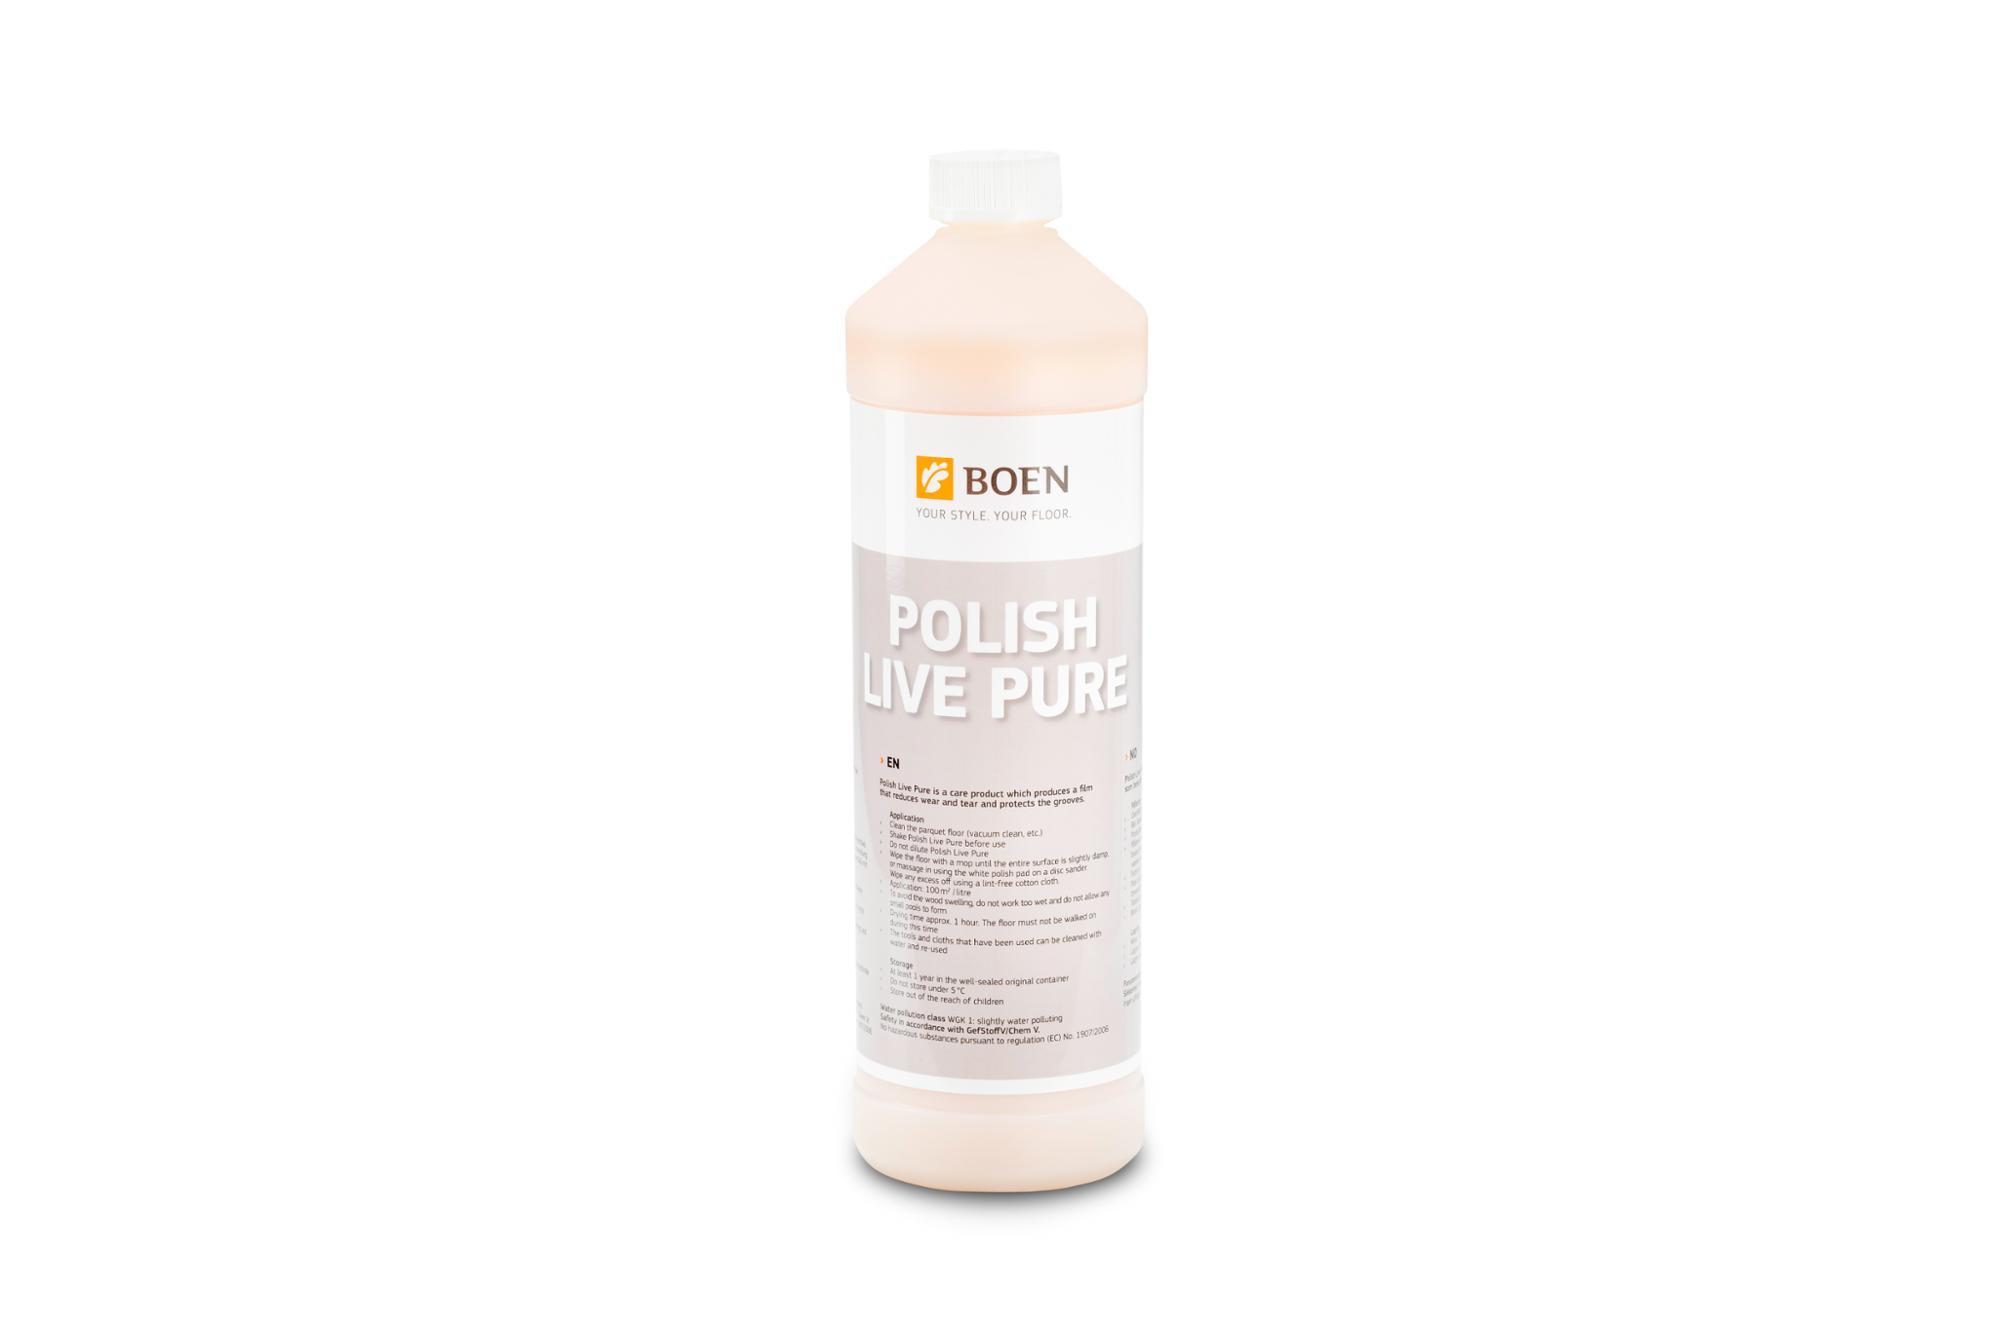 BOEN Polish Live Pure 1l

Eco-friendly care product, water resistant.
Usage ca. 1 litre for 30-50m²